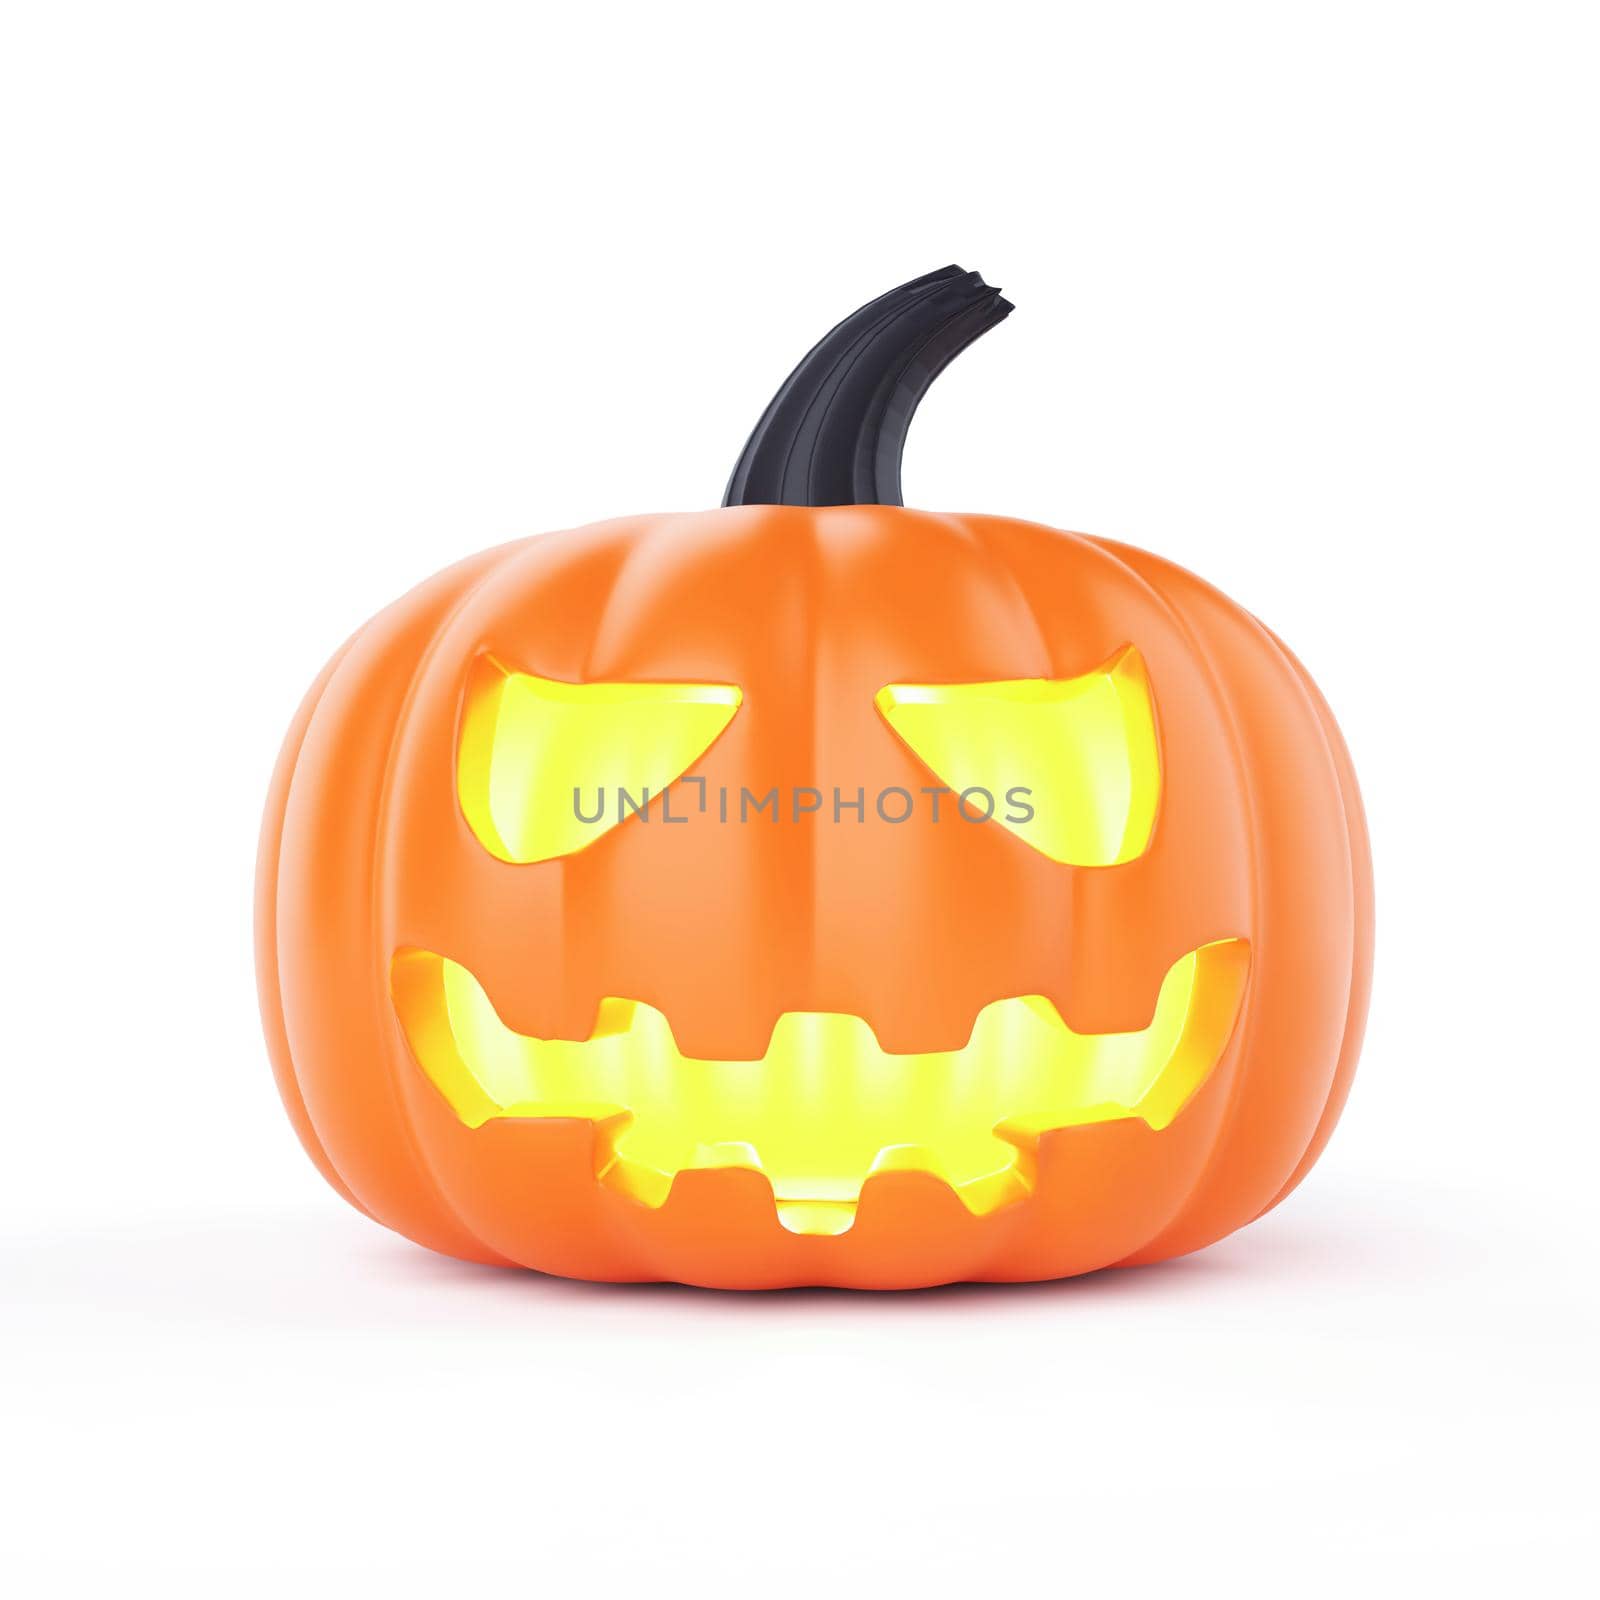 Halloween Jack O Lantern pumpkin with candlelight inside on isolated white background. Object and holiday festival concept. 3D illustration rendering